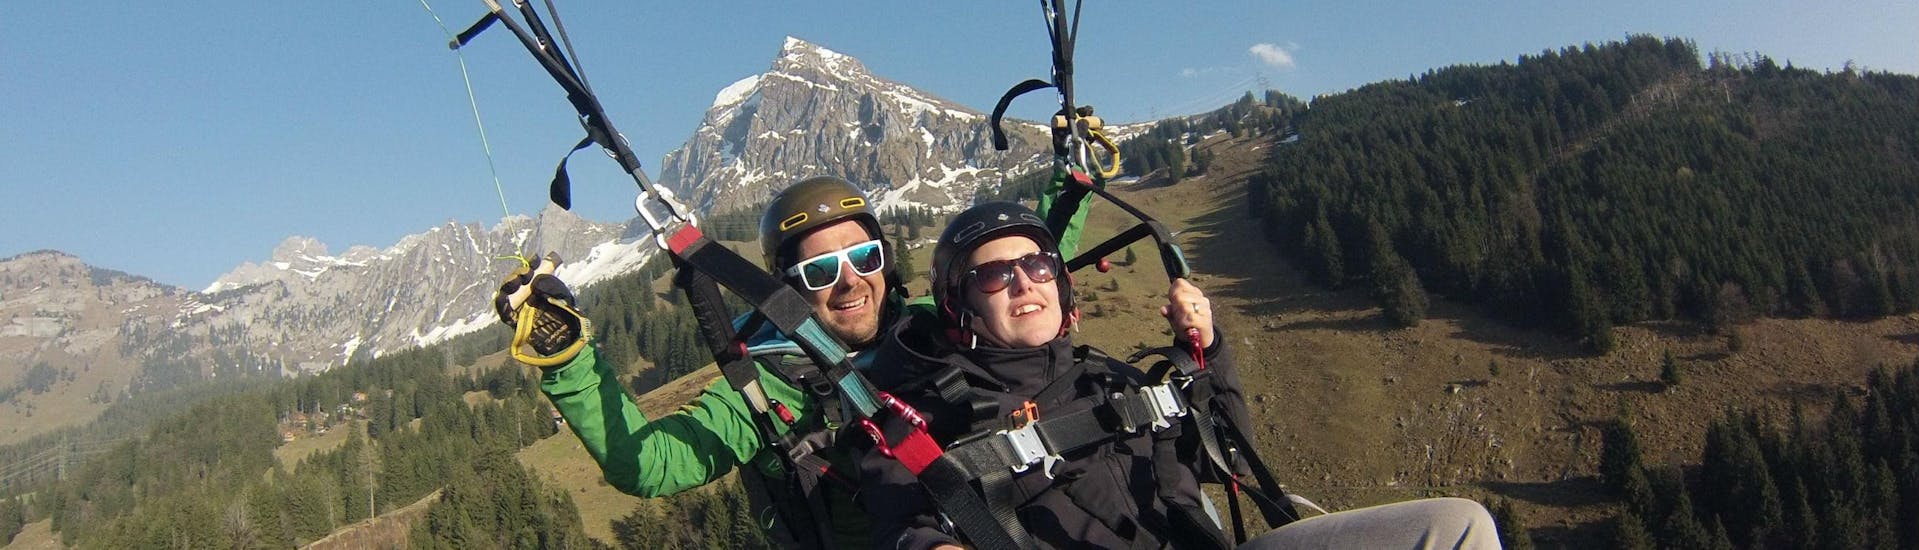 Tandem Paragliding in the Glarnerland &amp; Walensee - Thermal with Robair Gleitschirmschule Saint-Gall - Hero image